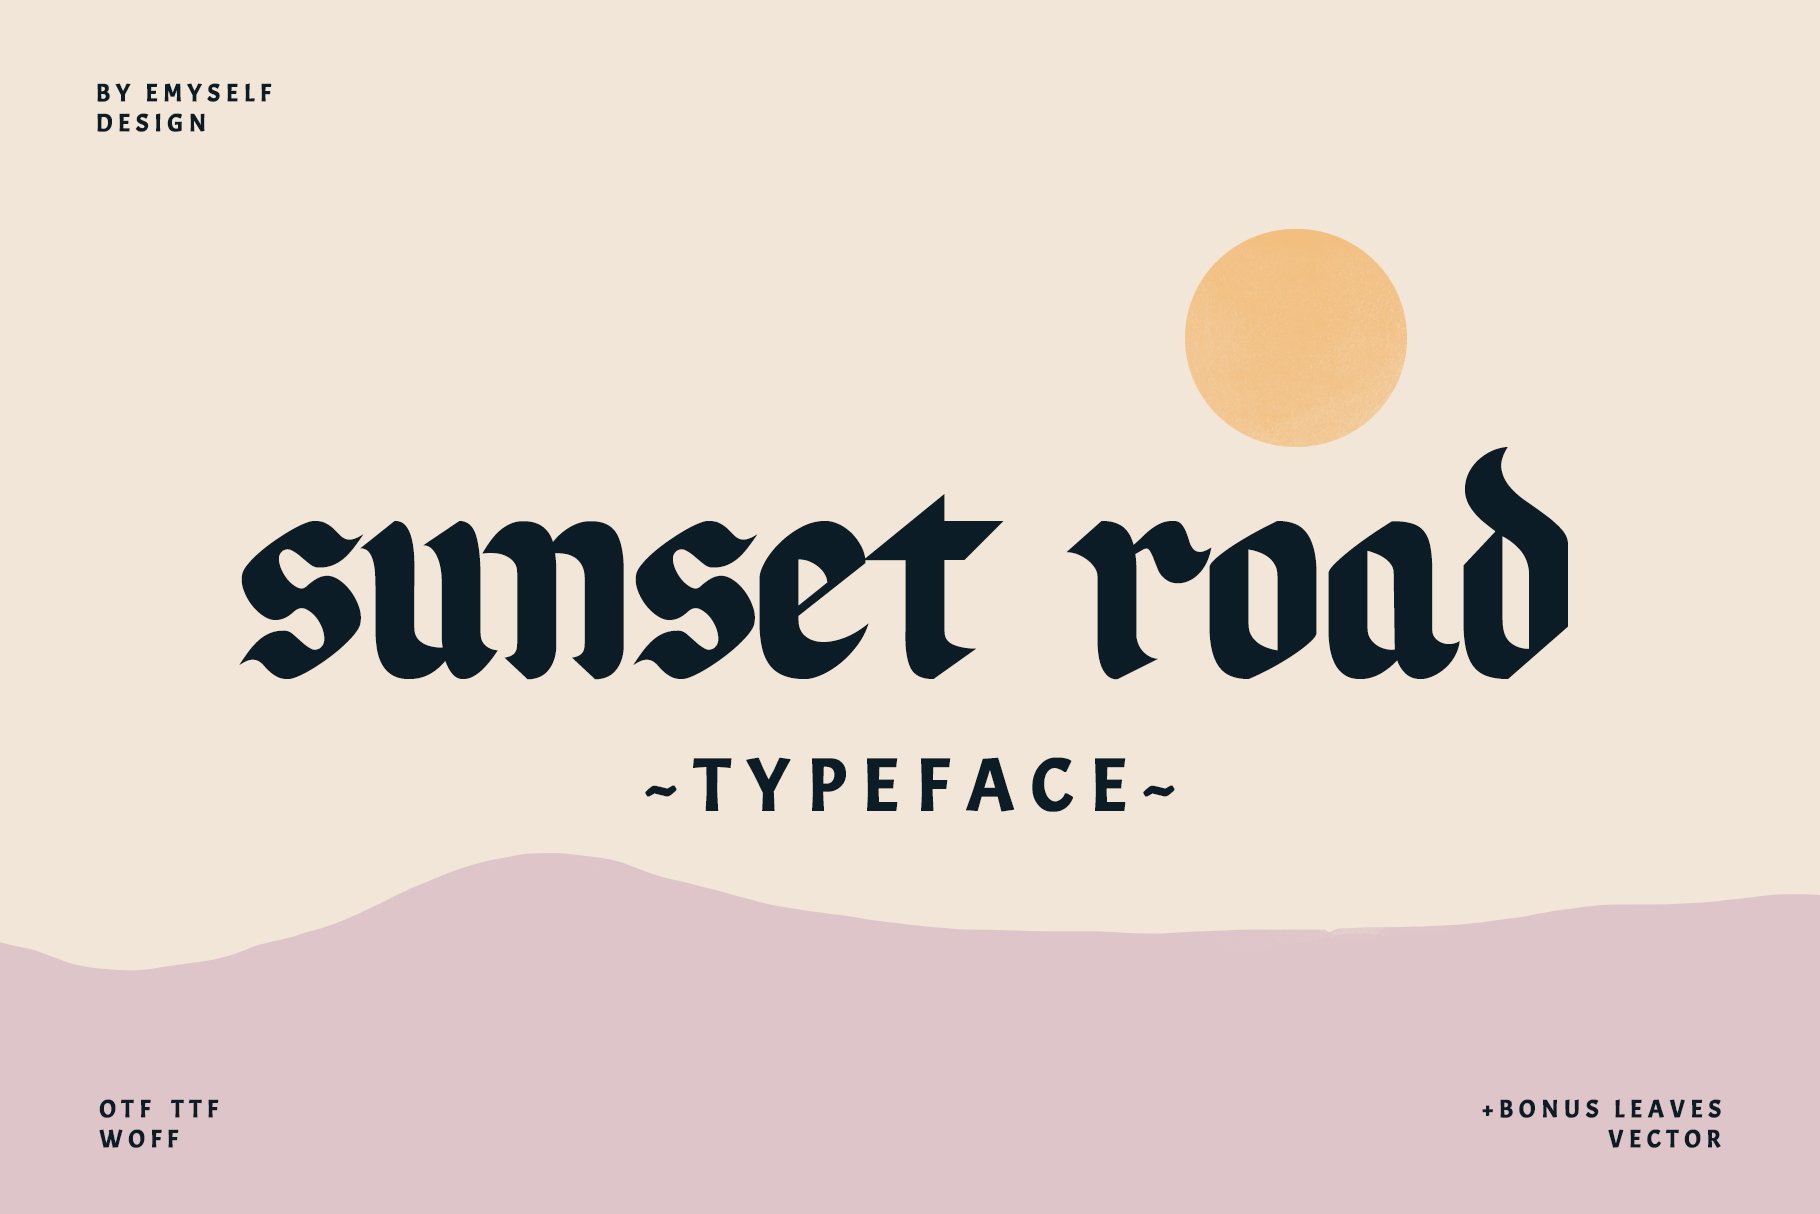 Sunset Road Typeface cover image.